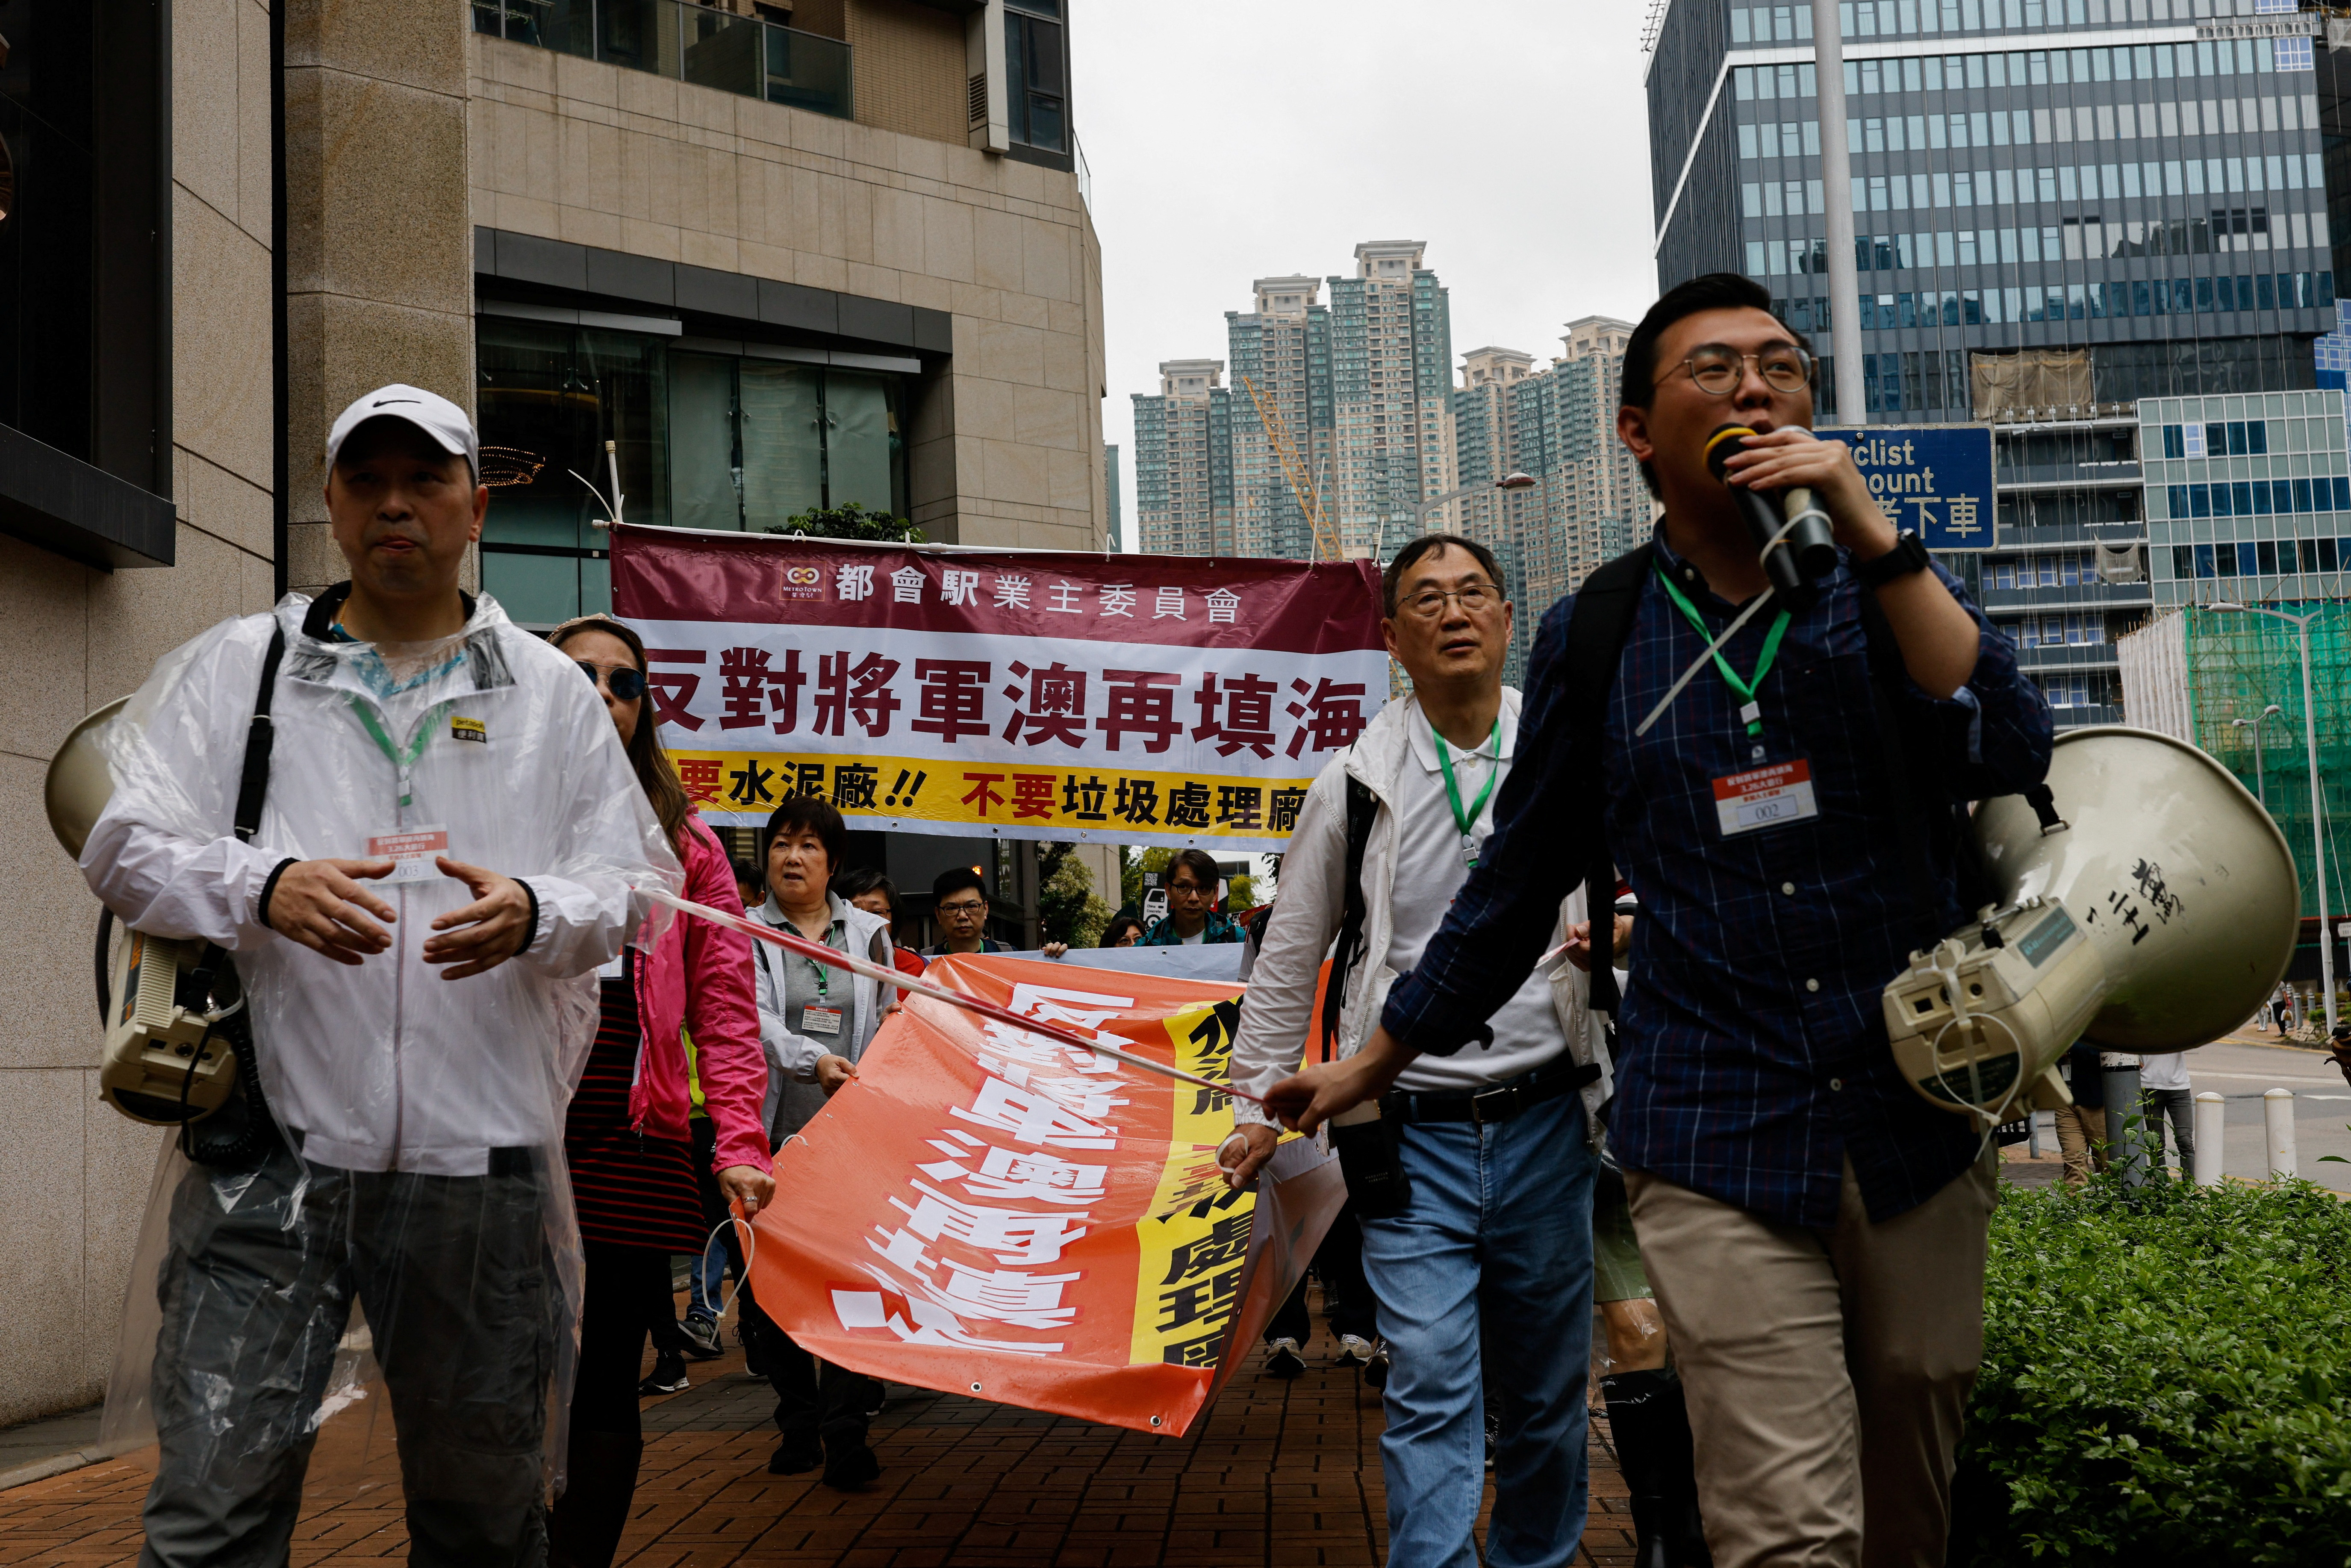 Protest against a land reclamation and waste transfer station project, in Hong Kong